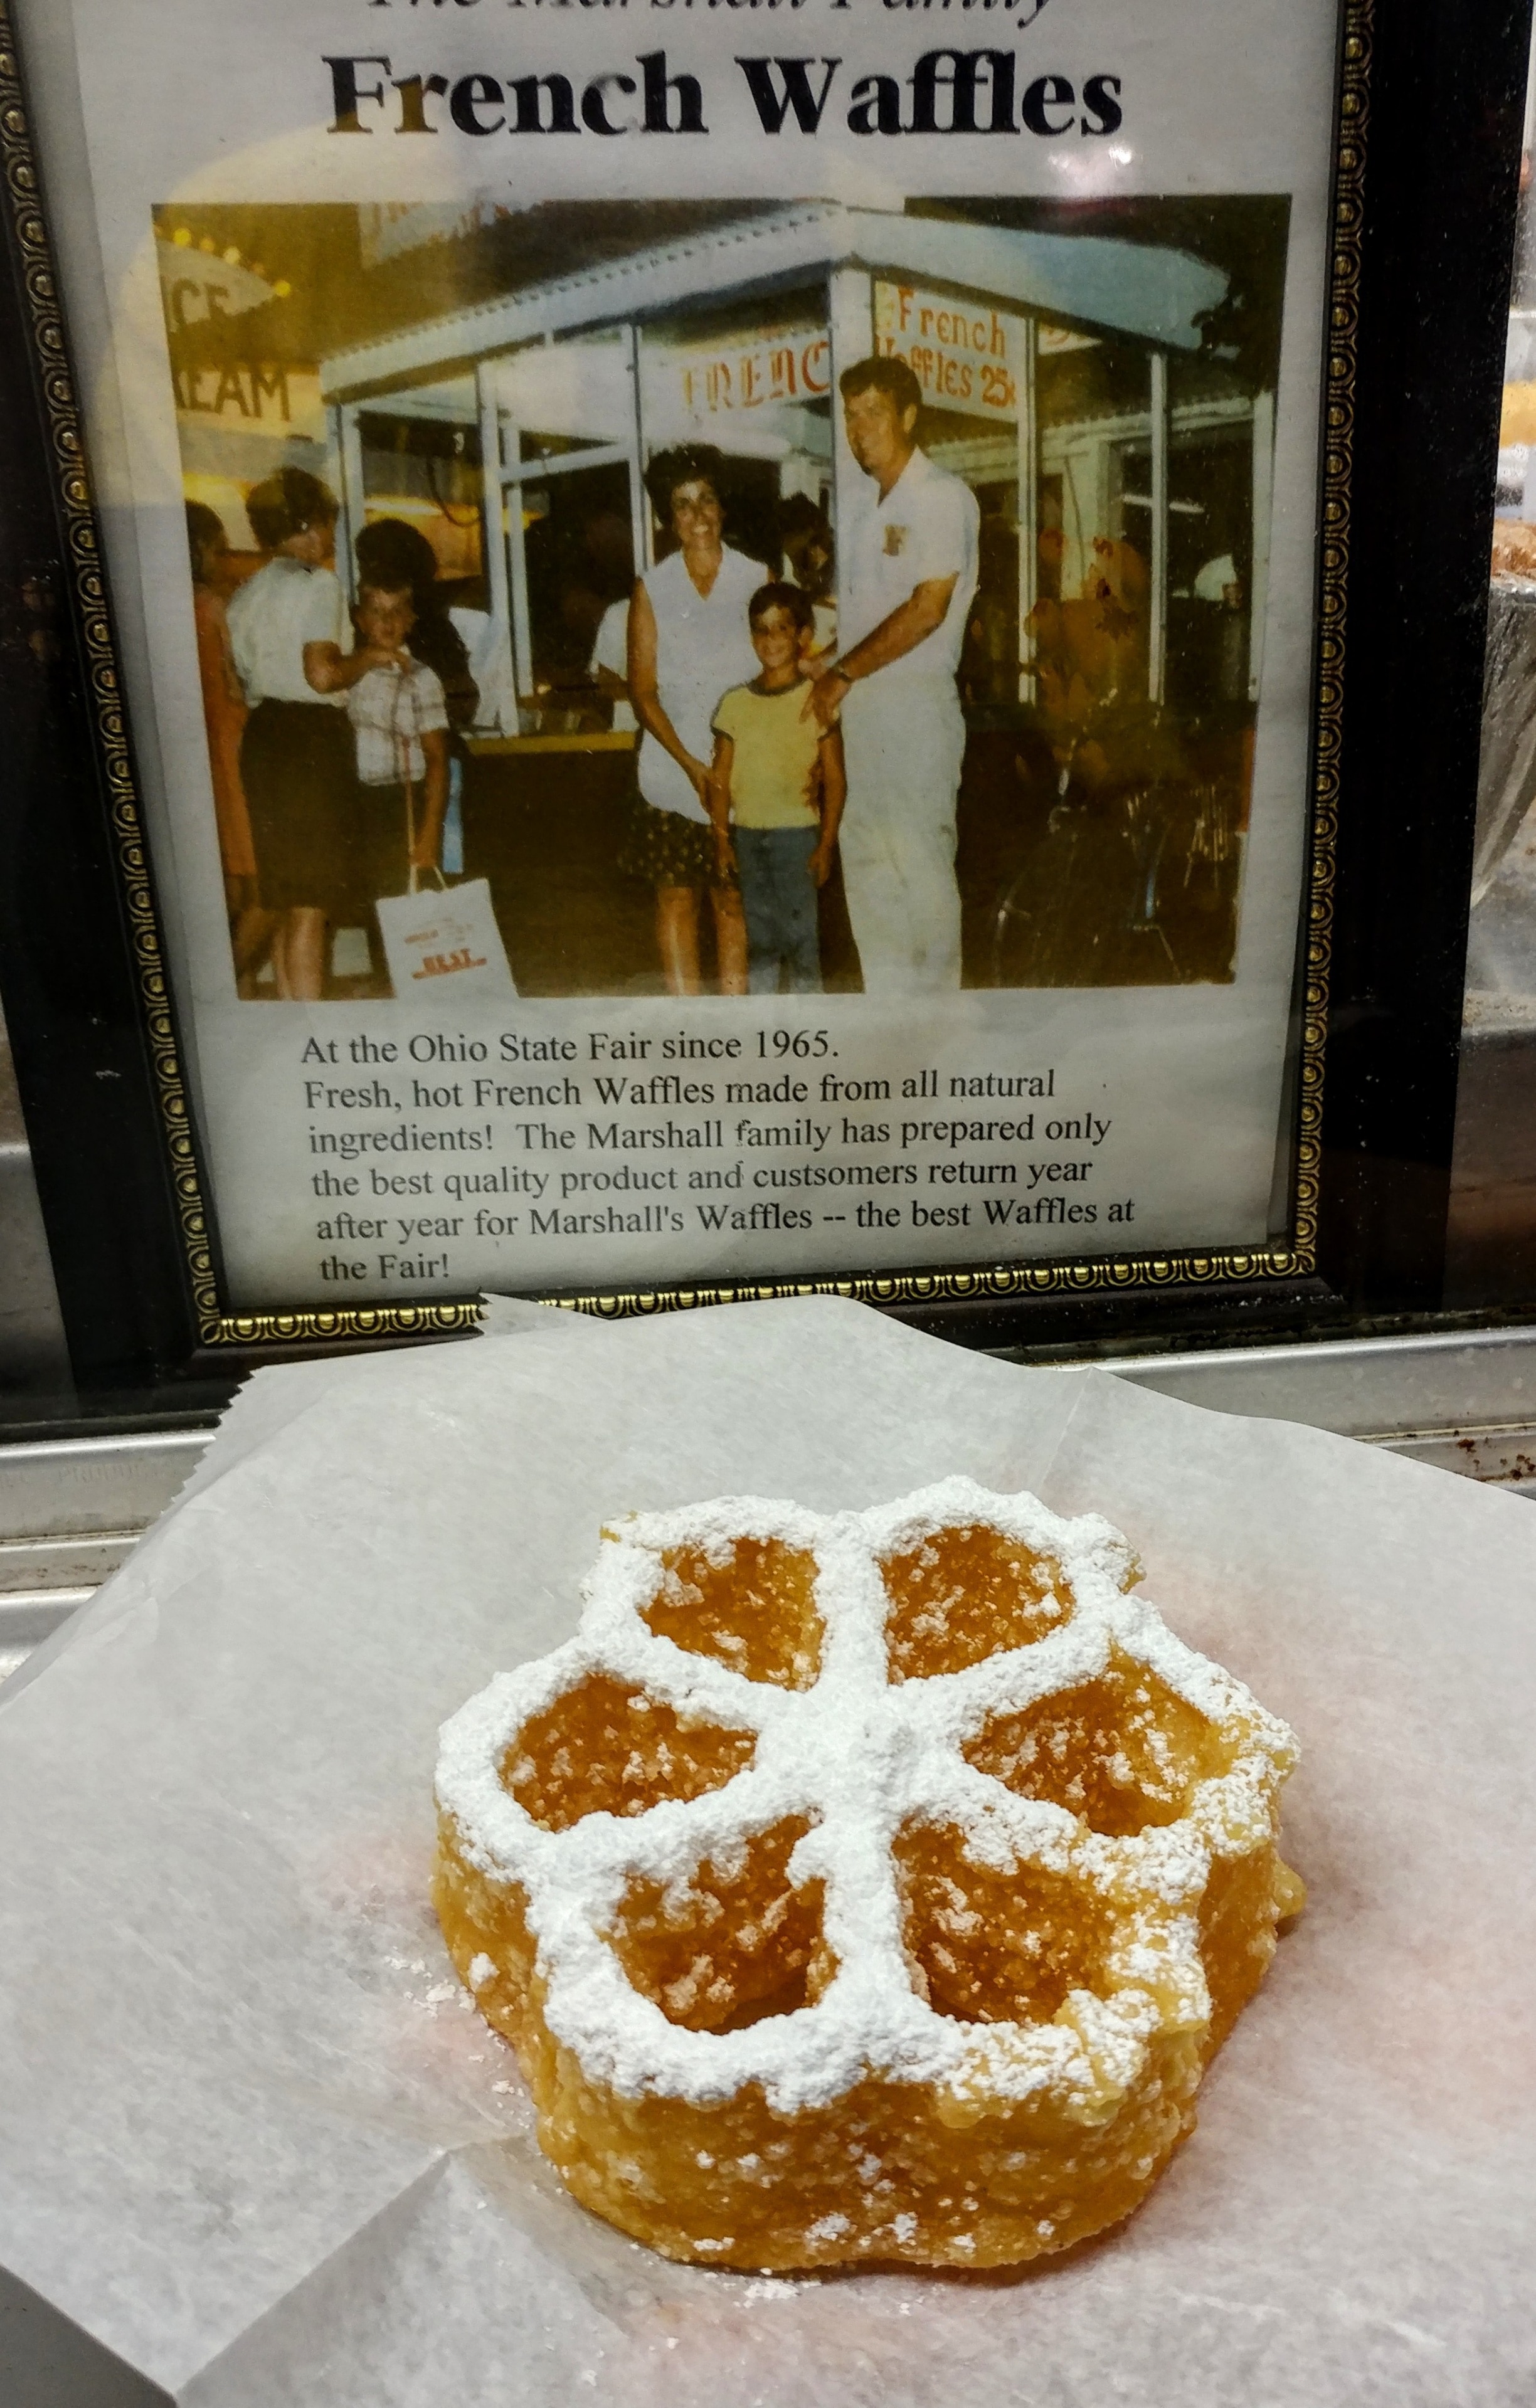 It's time again for the Ohio State Fair, which means it's time for a deep fried fair food feast!

A staple at the fair since 1965, Marshall Family French Waffles.

Basically a branding iron is dipped in batter and dropped in a deep fryer to create the crunchy, flaky, sweet treats.